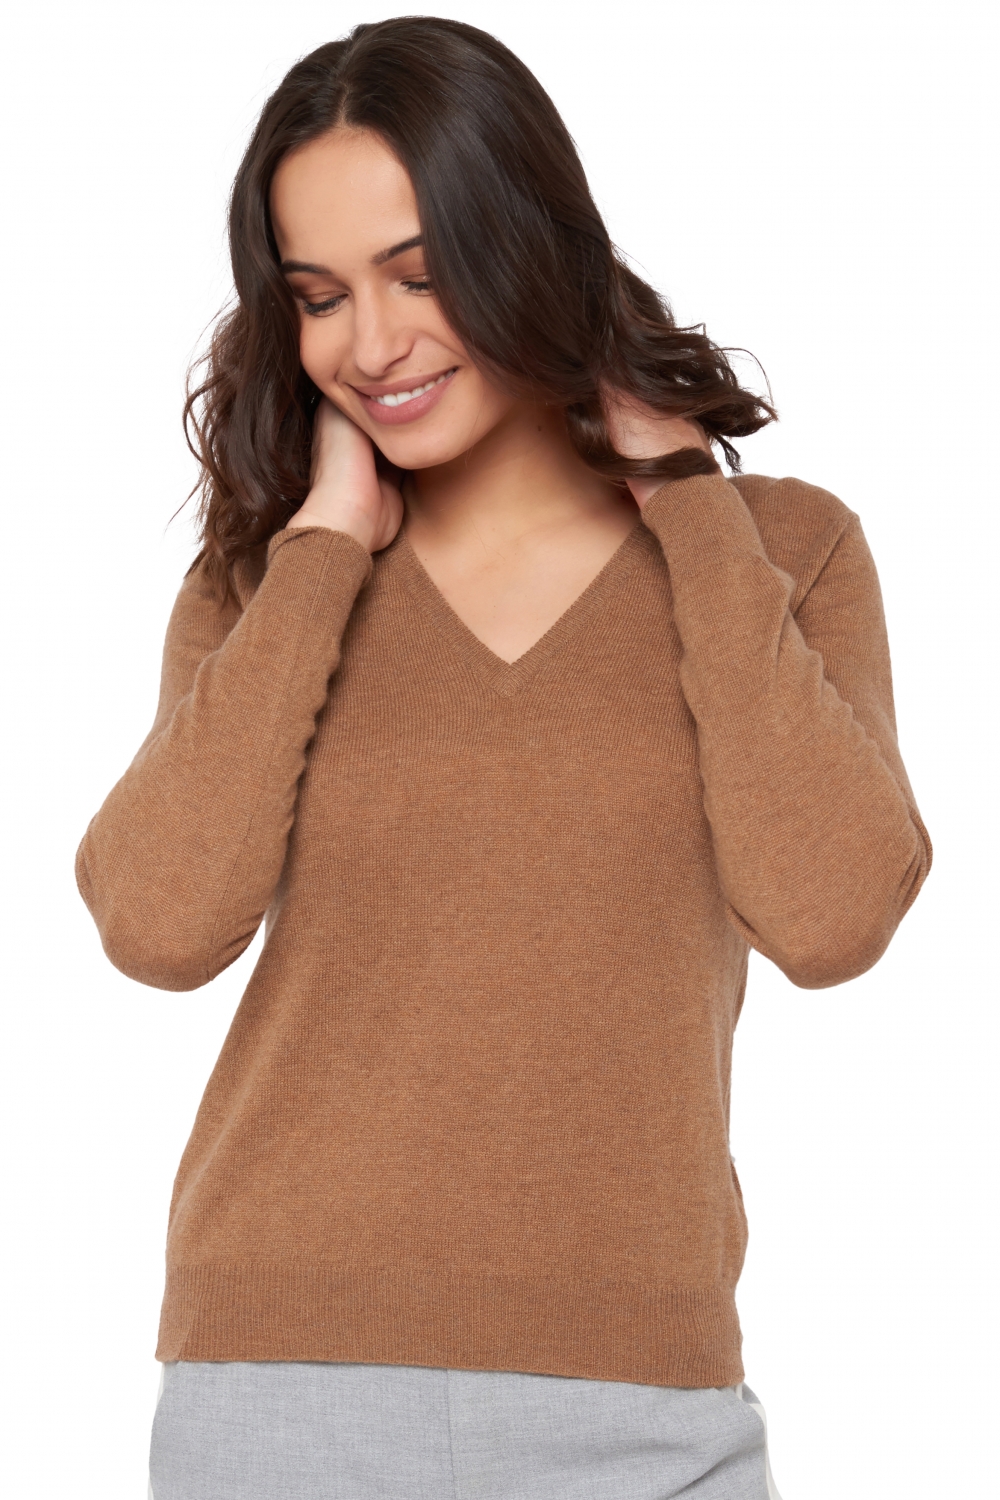 Cashmere ladies timeless classics faustine camel chine xl